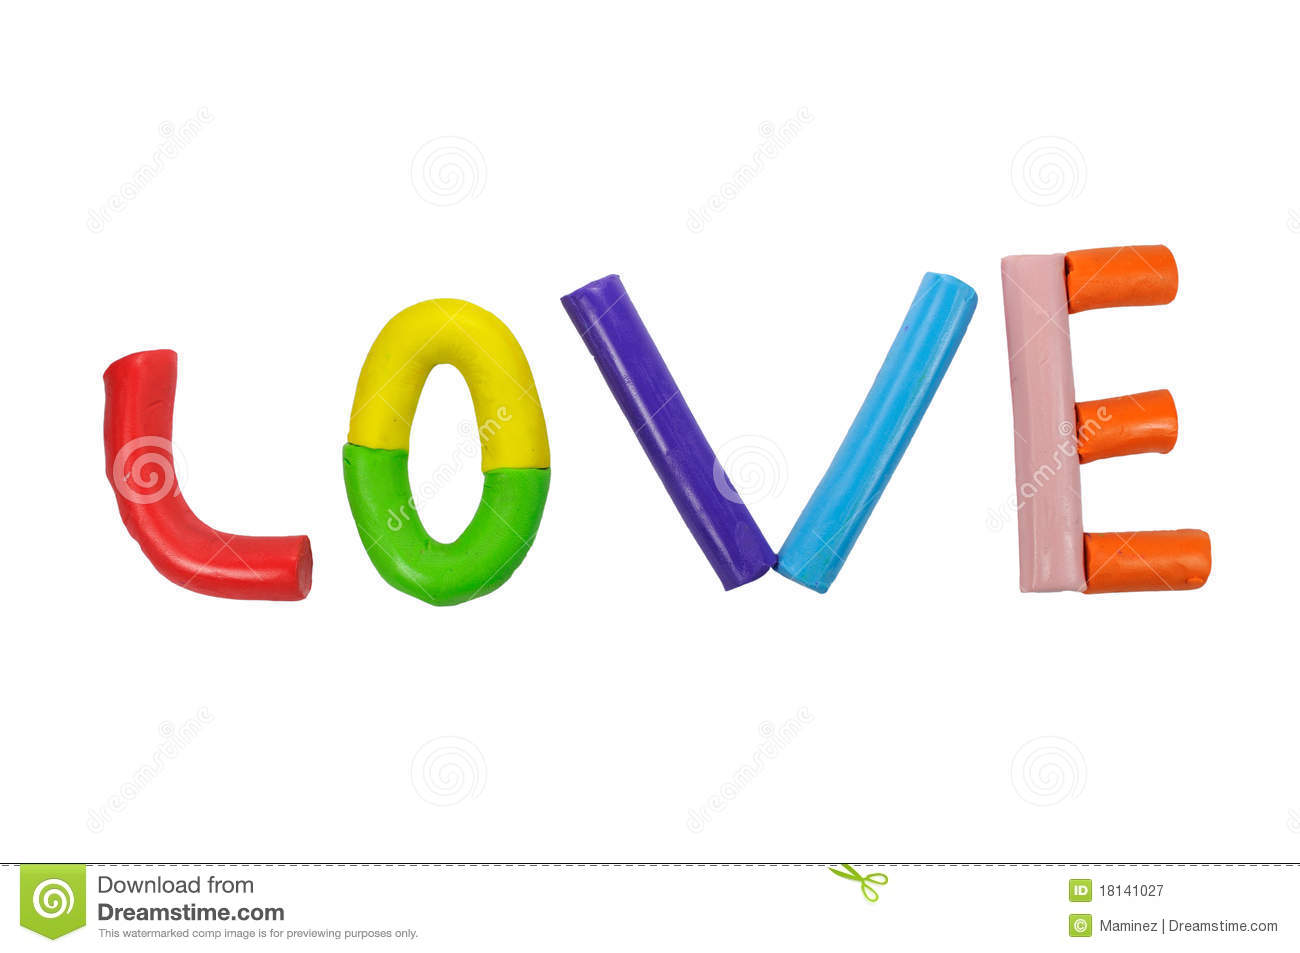 Love Modeling Clay Royalty Free Stock Photography   Image  18141027